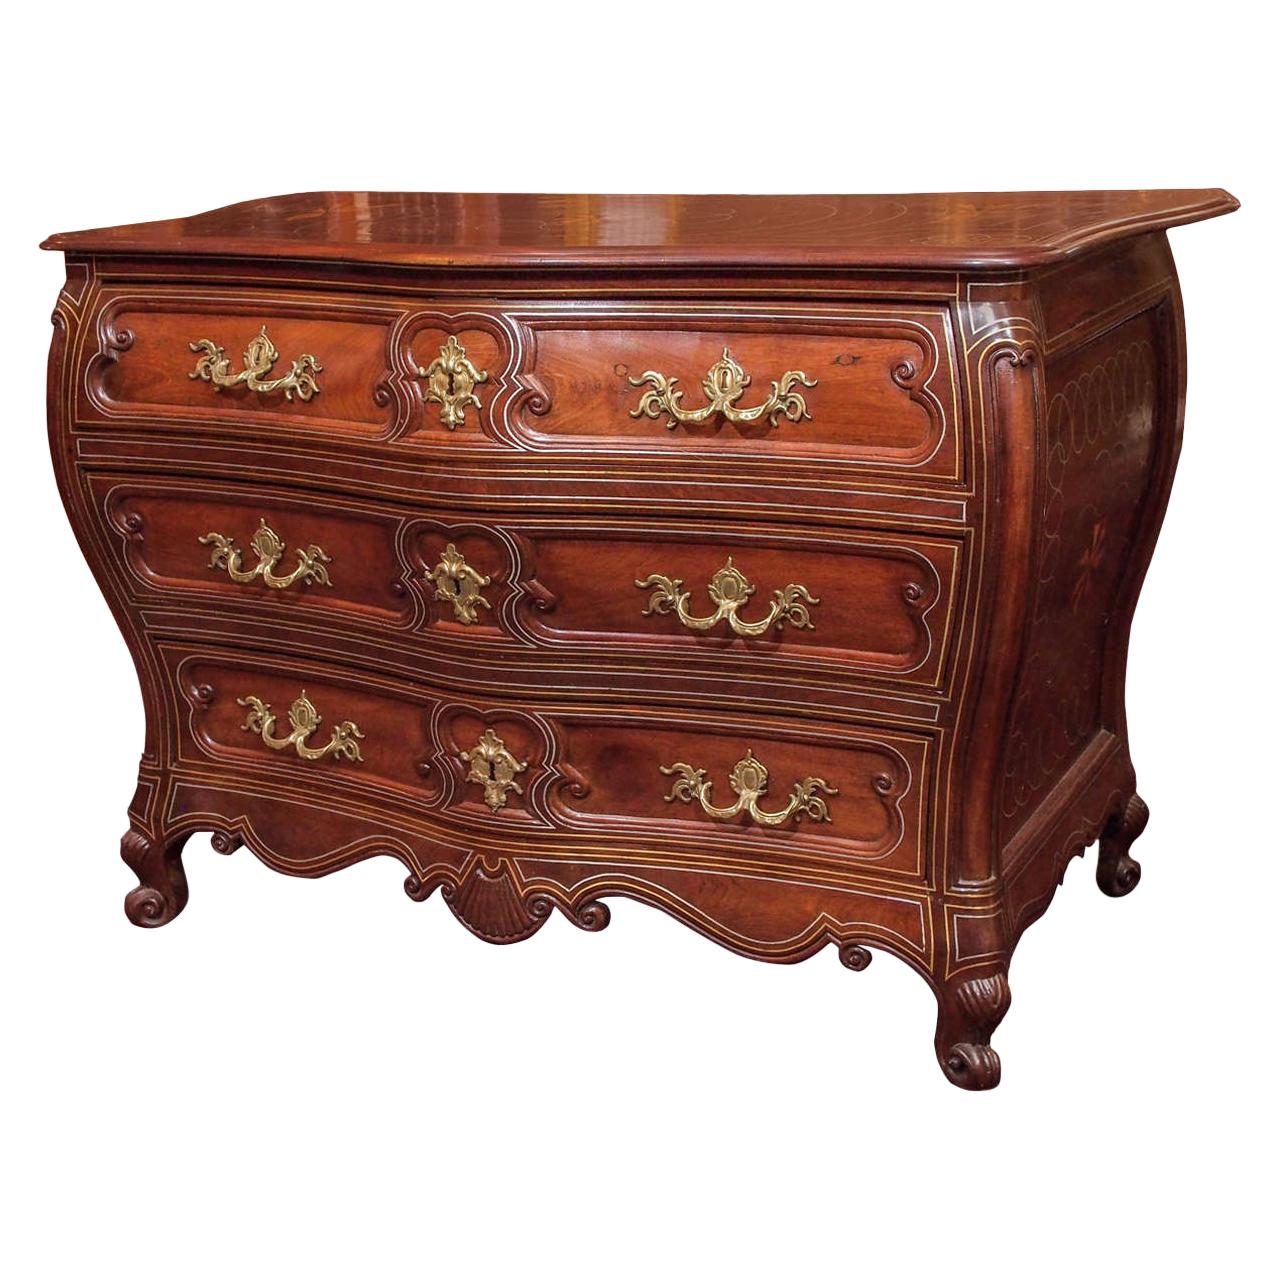 Antique French Provincial Walnut Bombe Chest with Metal Inlay, circa 1780-1810 For Sale